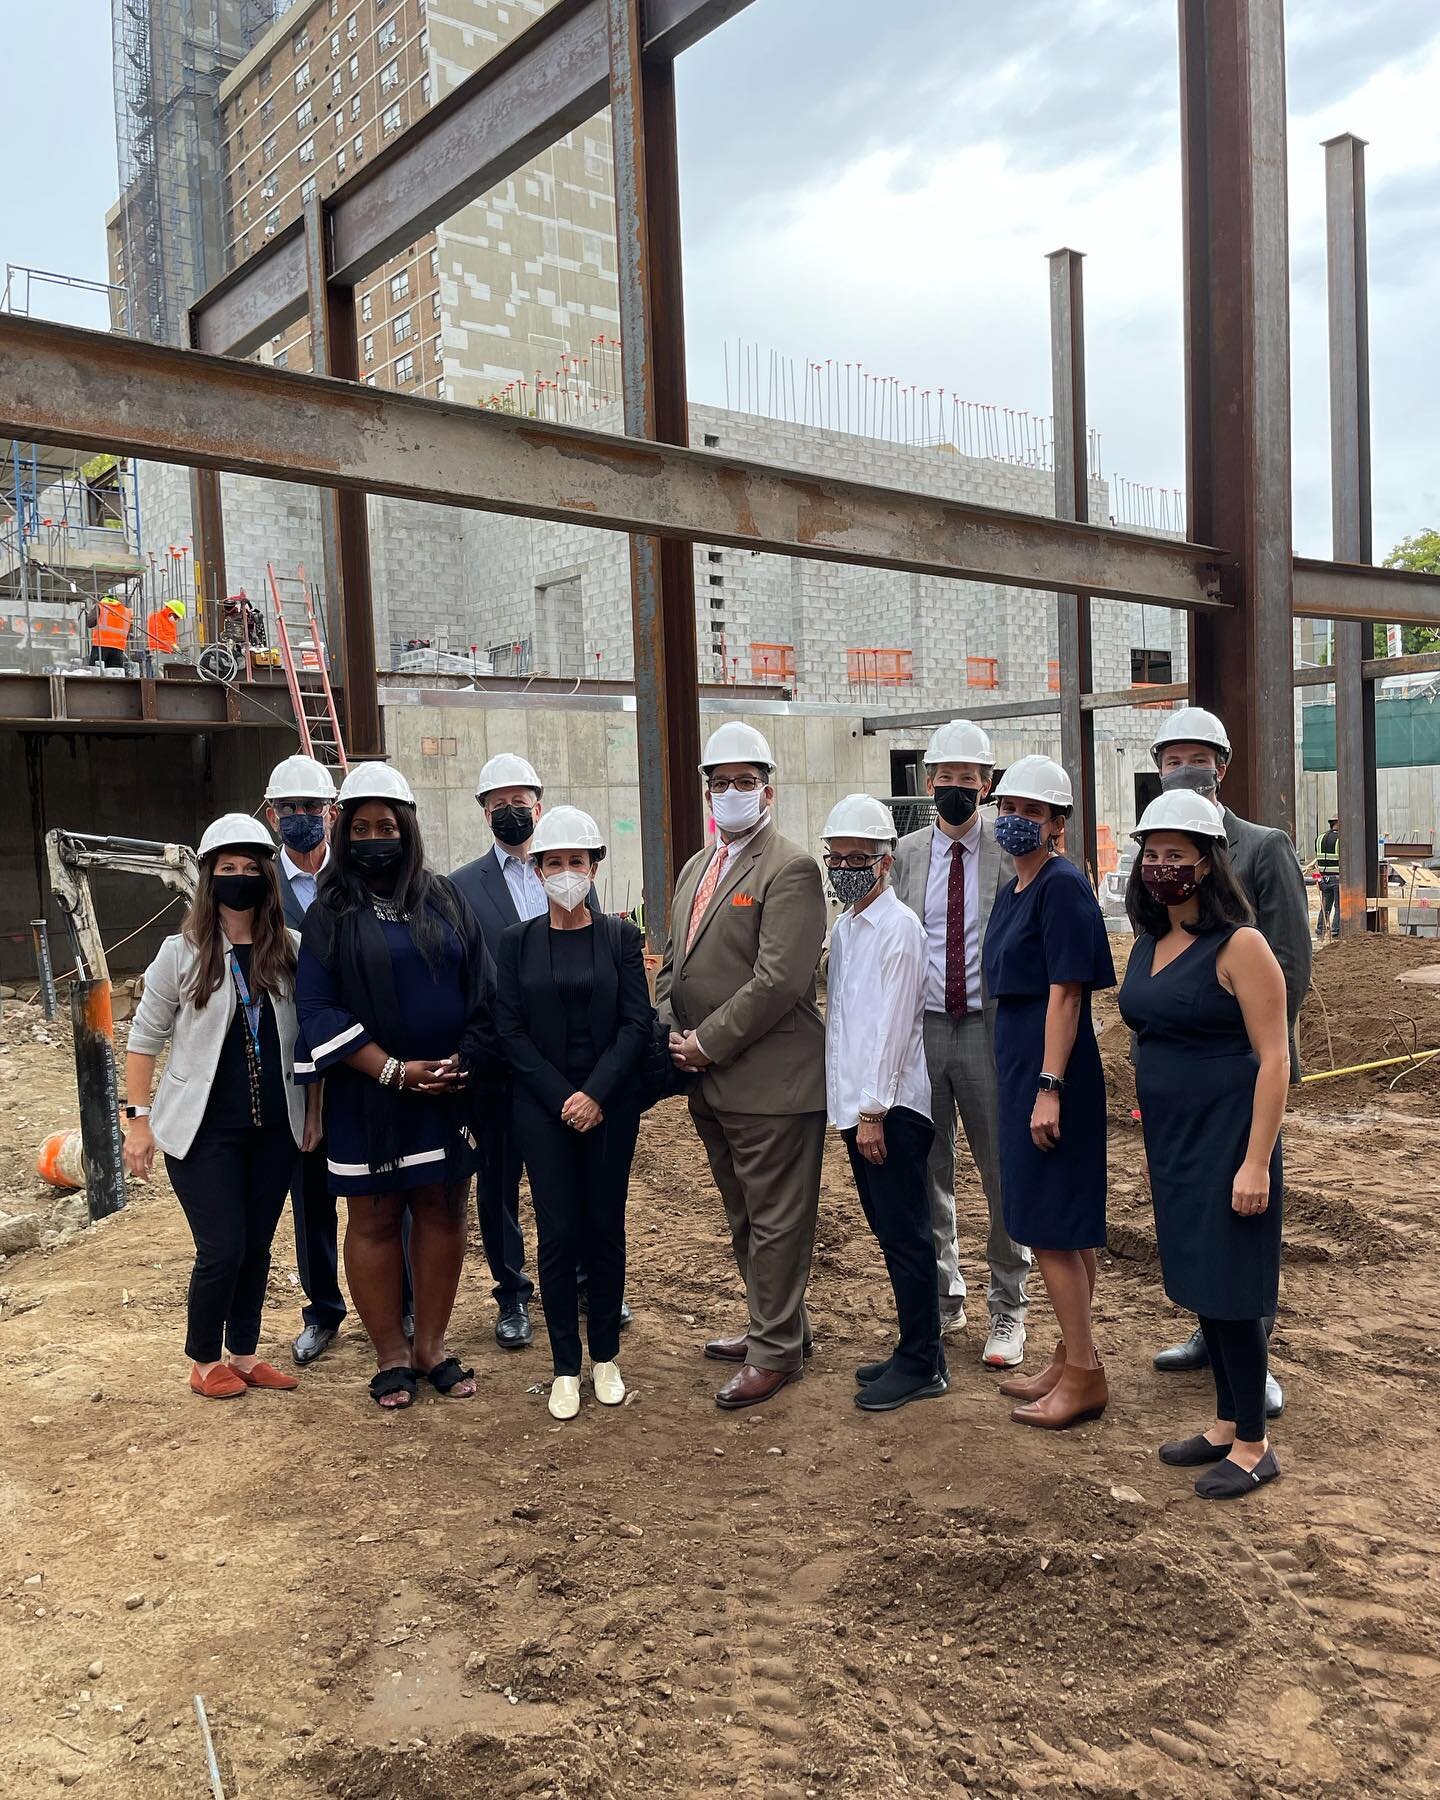 Thank you to all who endured the pouring rain, blaring fire trucks and airplanes overhead to join @sus_org and Bronx Pro in celebrating the construction of Melrose North! When complete, Melrose North will bring 171 units of affordable and supported h